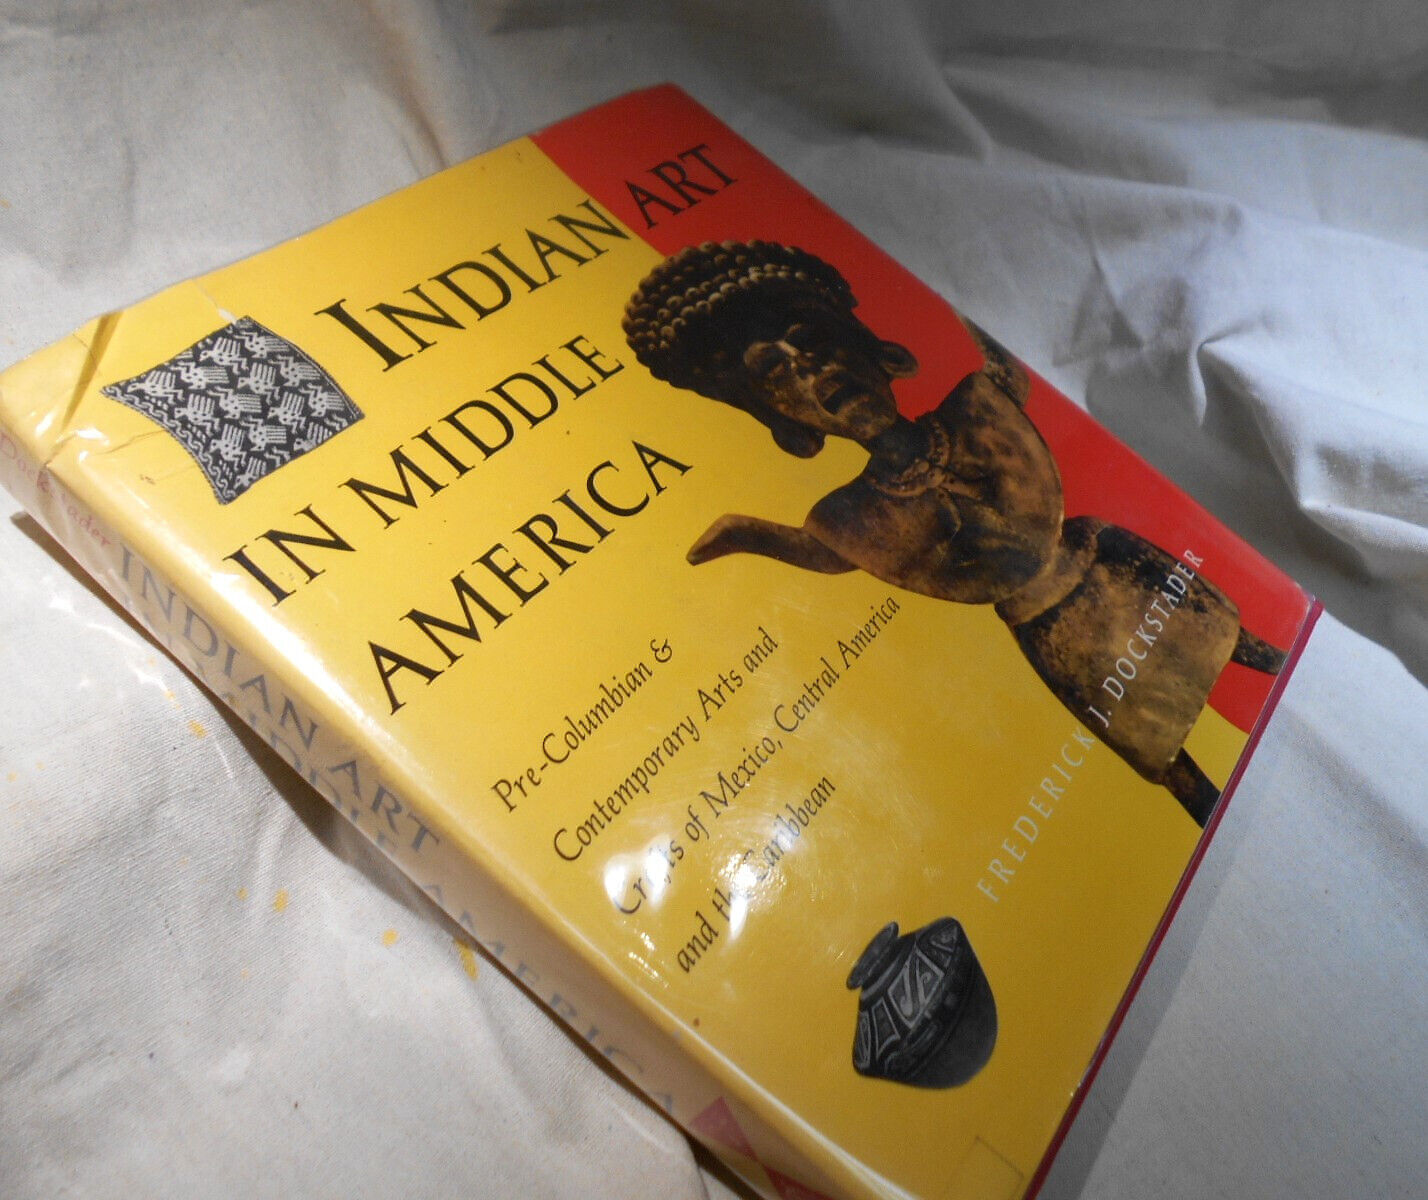 pre columbian,, INDIAN ART IN MIDDLE AMERICA Docksteader excellent reference